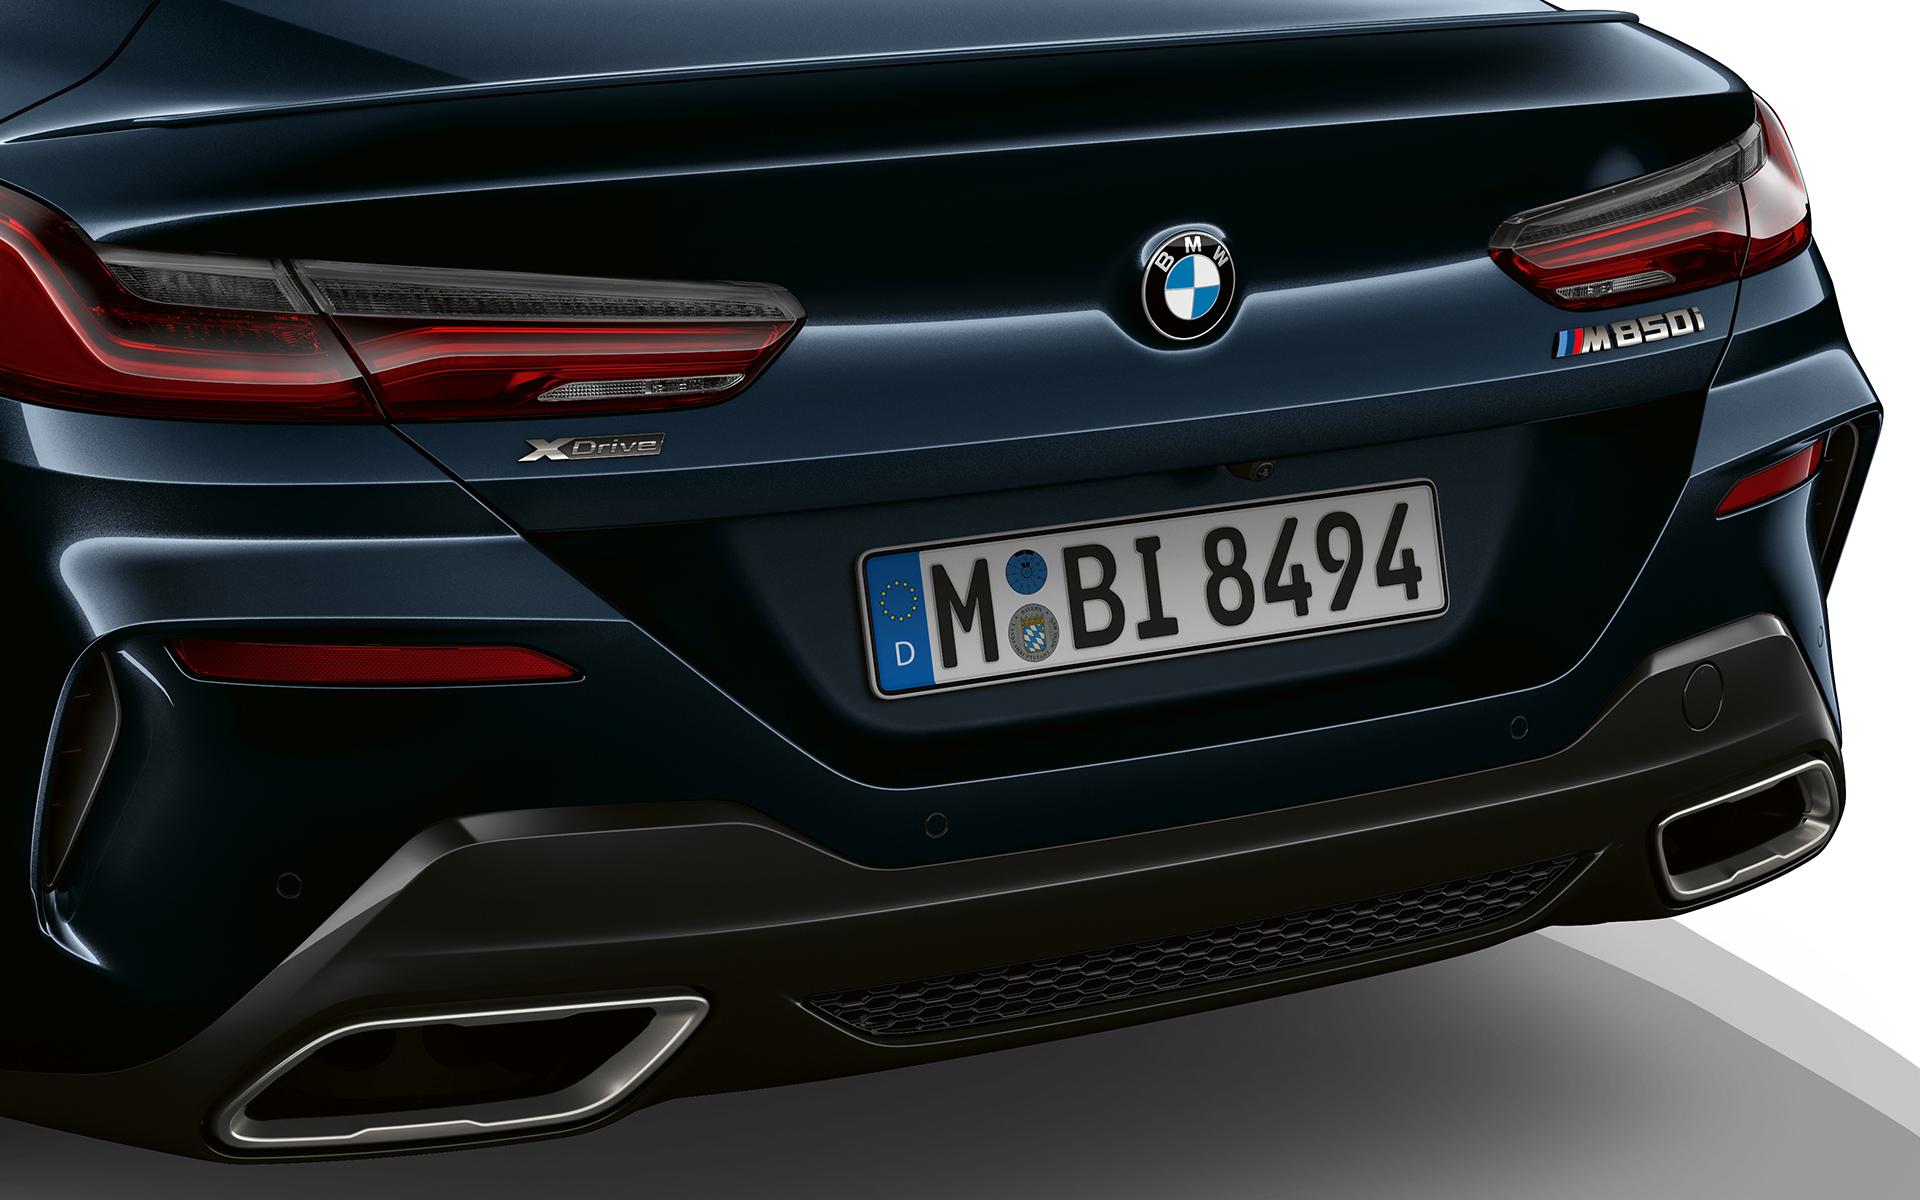 THE 8: The luxury sports car of BMW